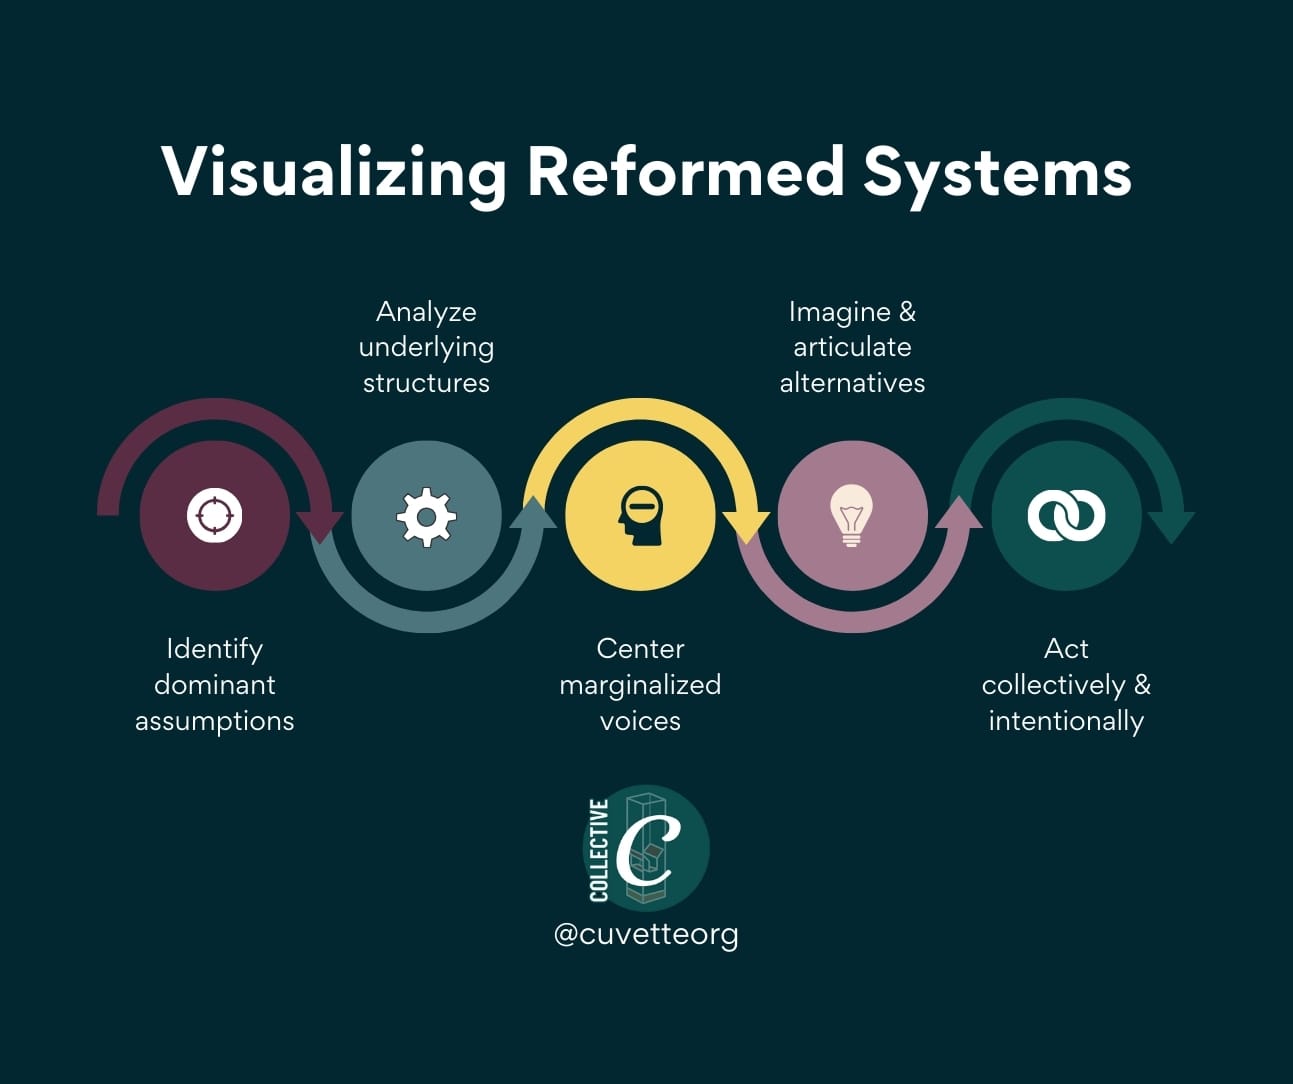 Visualizing Reformed Systems: 1. Identify dominant assumptions, 2. Analyze underlying structures, 3. Center marginalized voices, 4. Imagine & articulate alternatives, and 5. Act collectively & intentionally.